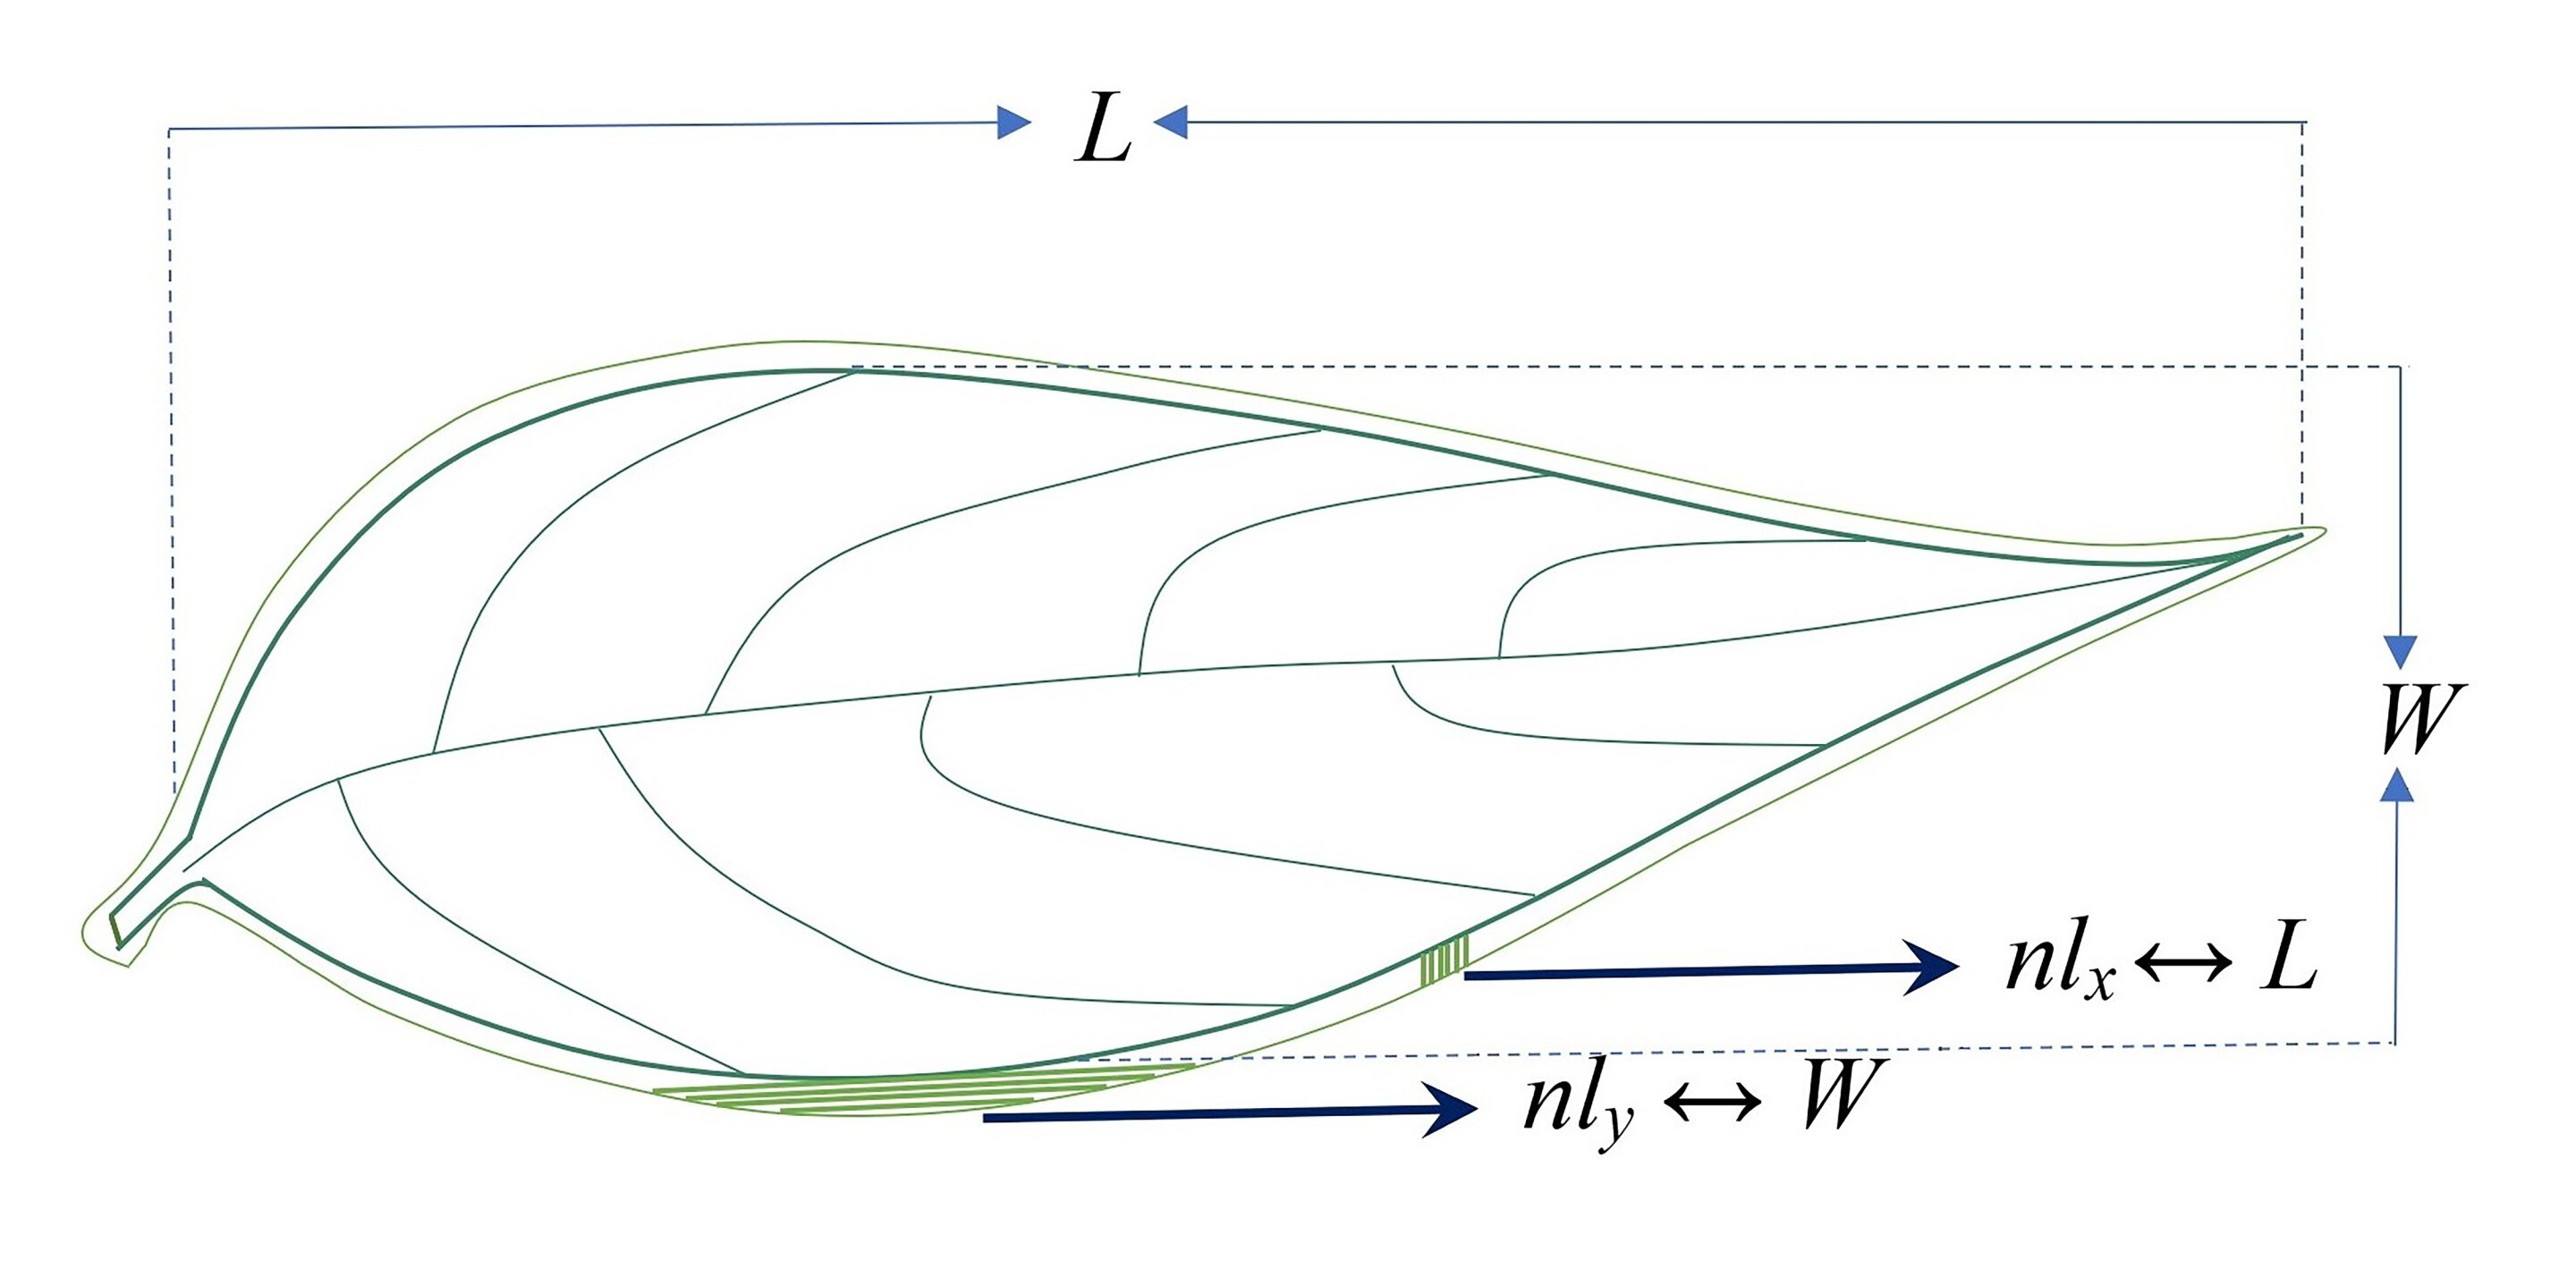 From black hole entropy to the complexity of plant leaves: an interesting link